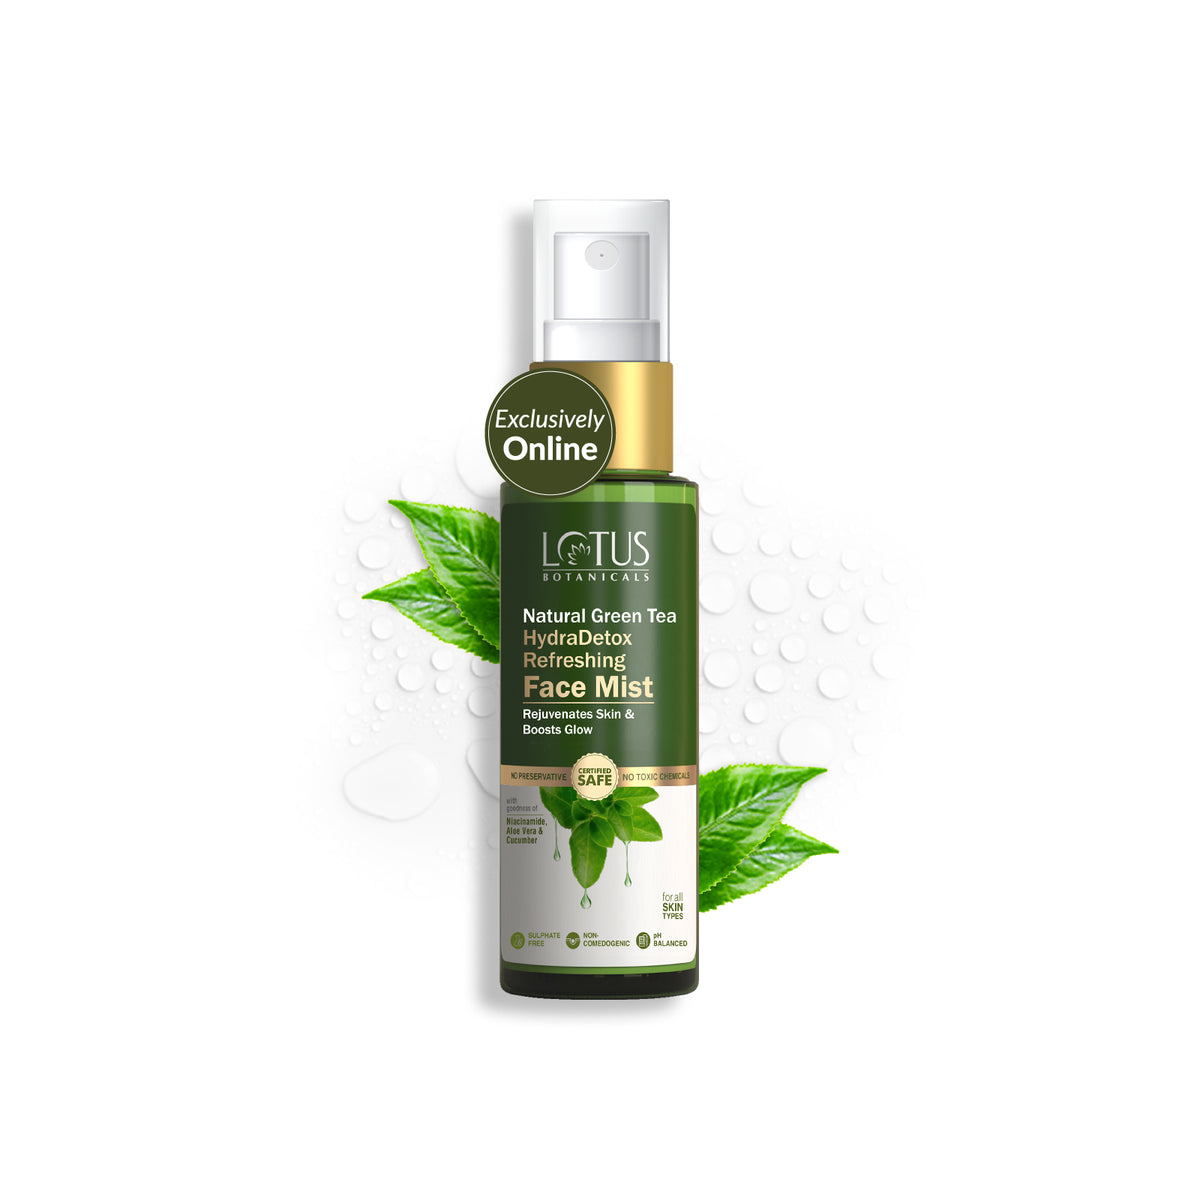 Refreshing face toner mist with natural green tea for HydraDetox hydration